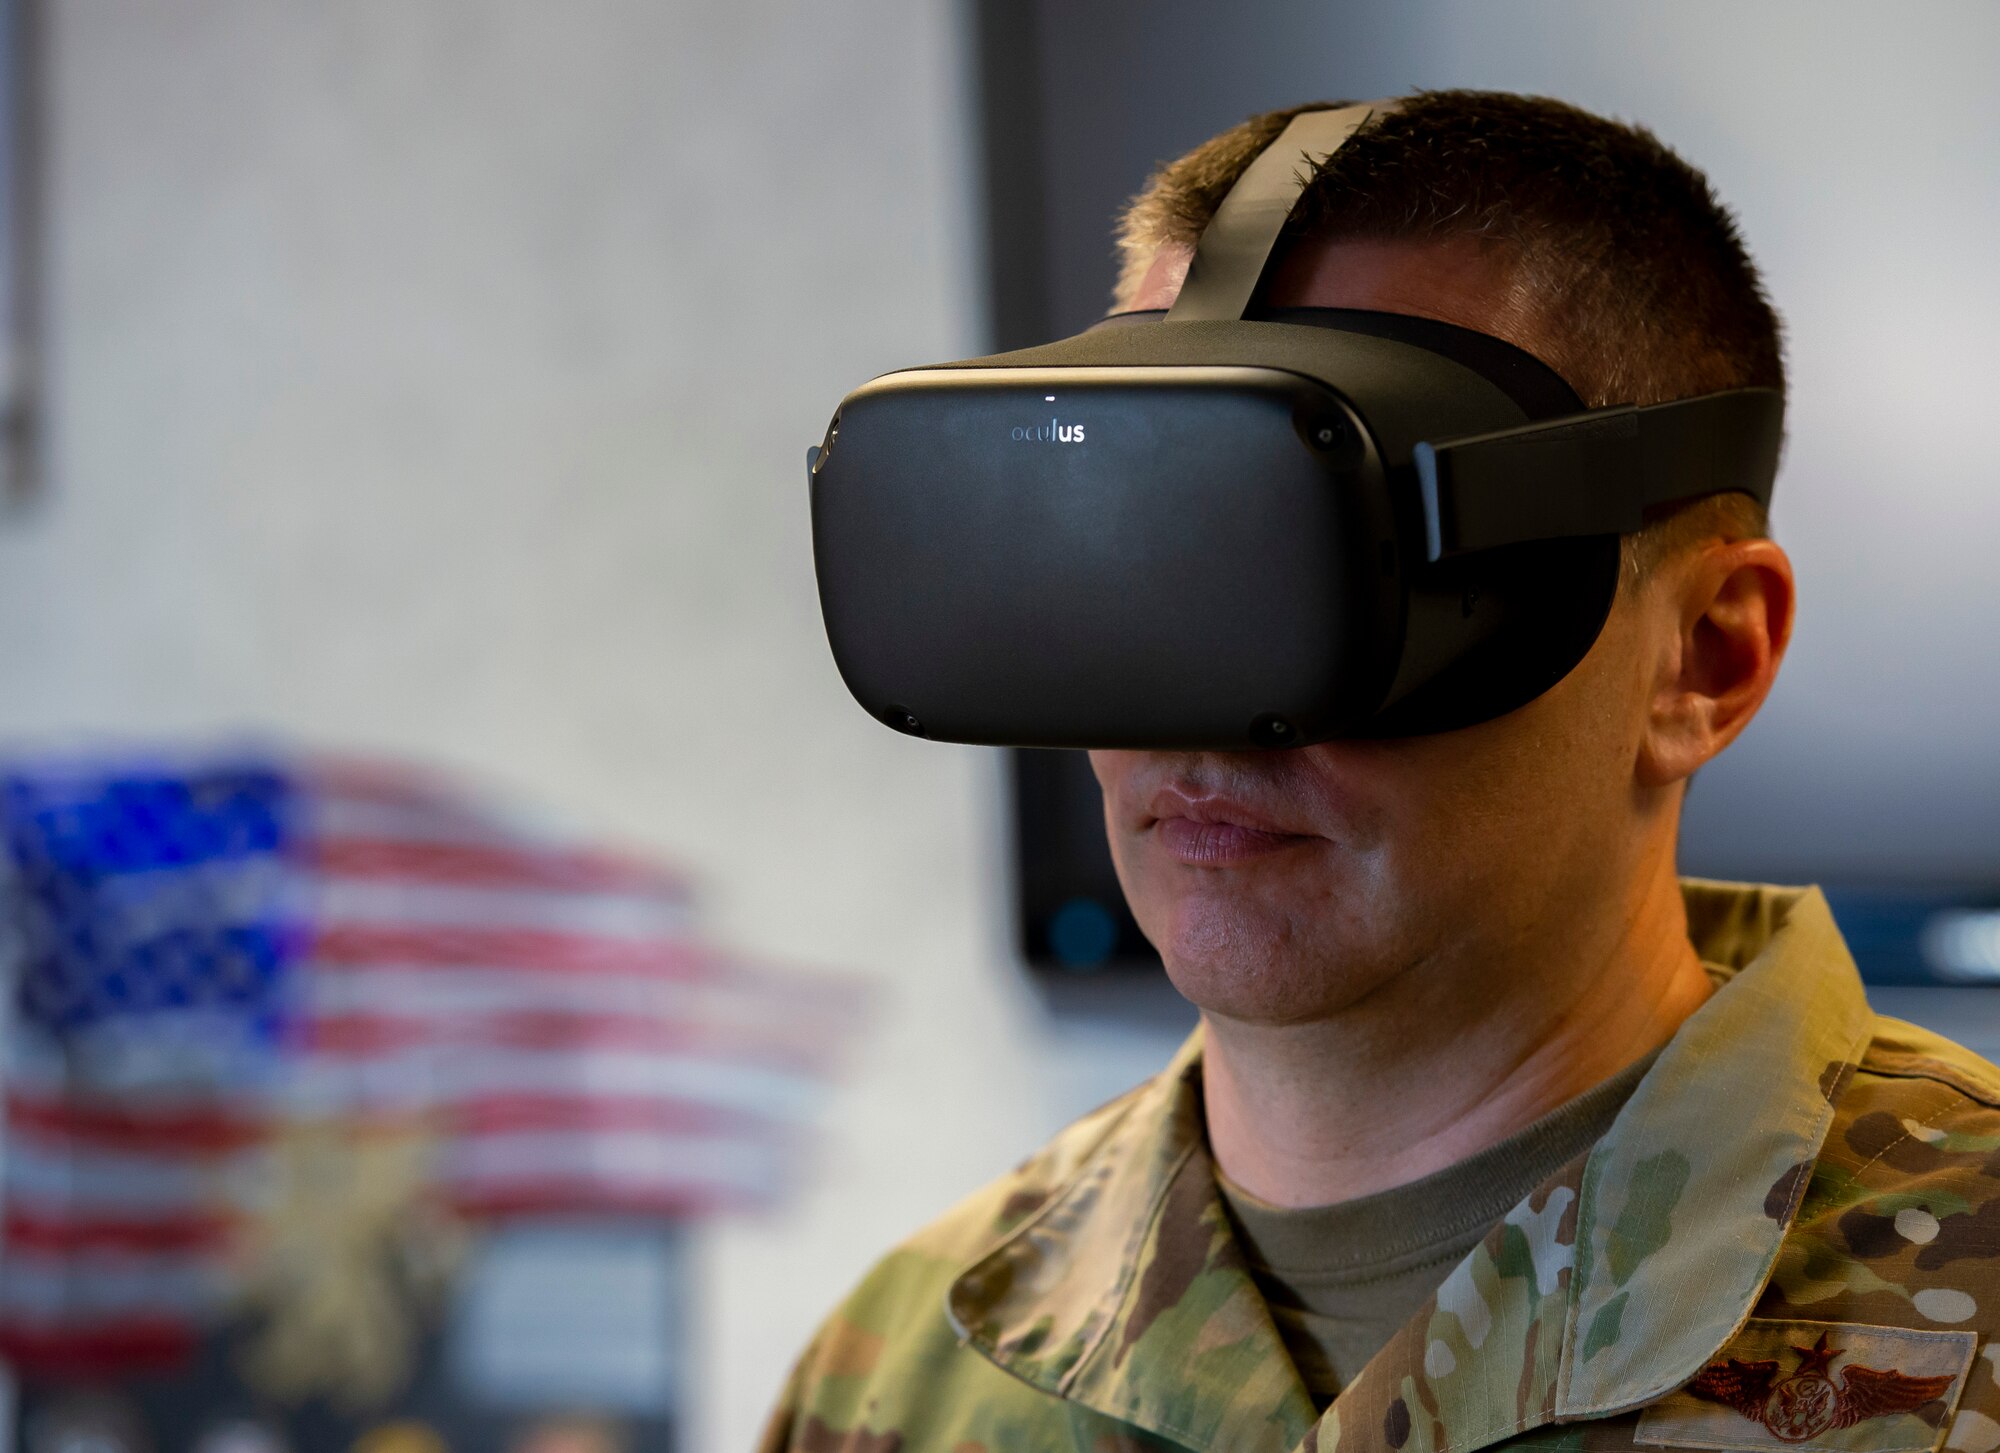 Chief Master Sgt. Nathan Parks, 434th Air Refueling Wing command chief, took part in the suicide prevention virtual reality training demo on April 30, 2021. The 30-minute training is aimed to familiarize Airmen with suicide prevention skills. The training involves putting on a virtual reality headset and entering a scenario where they interact with an Airman in distress. (U.S. Air Force photo by Senior Airman Jonathan Stefanko)